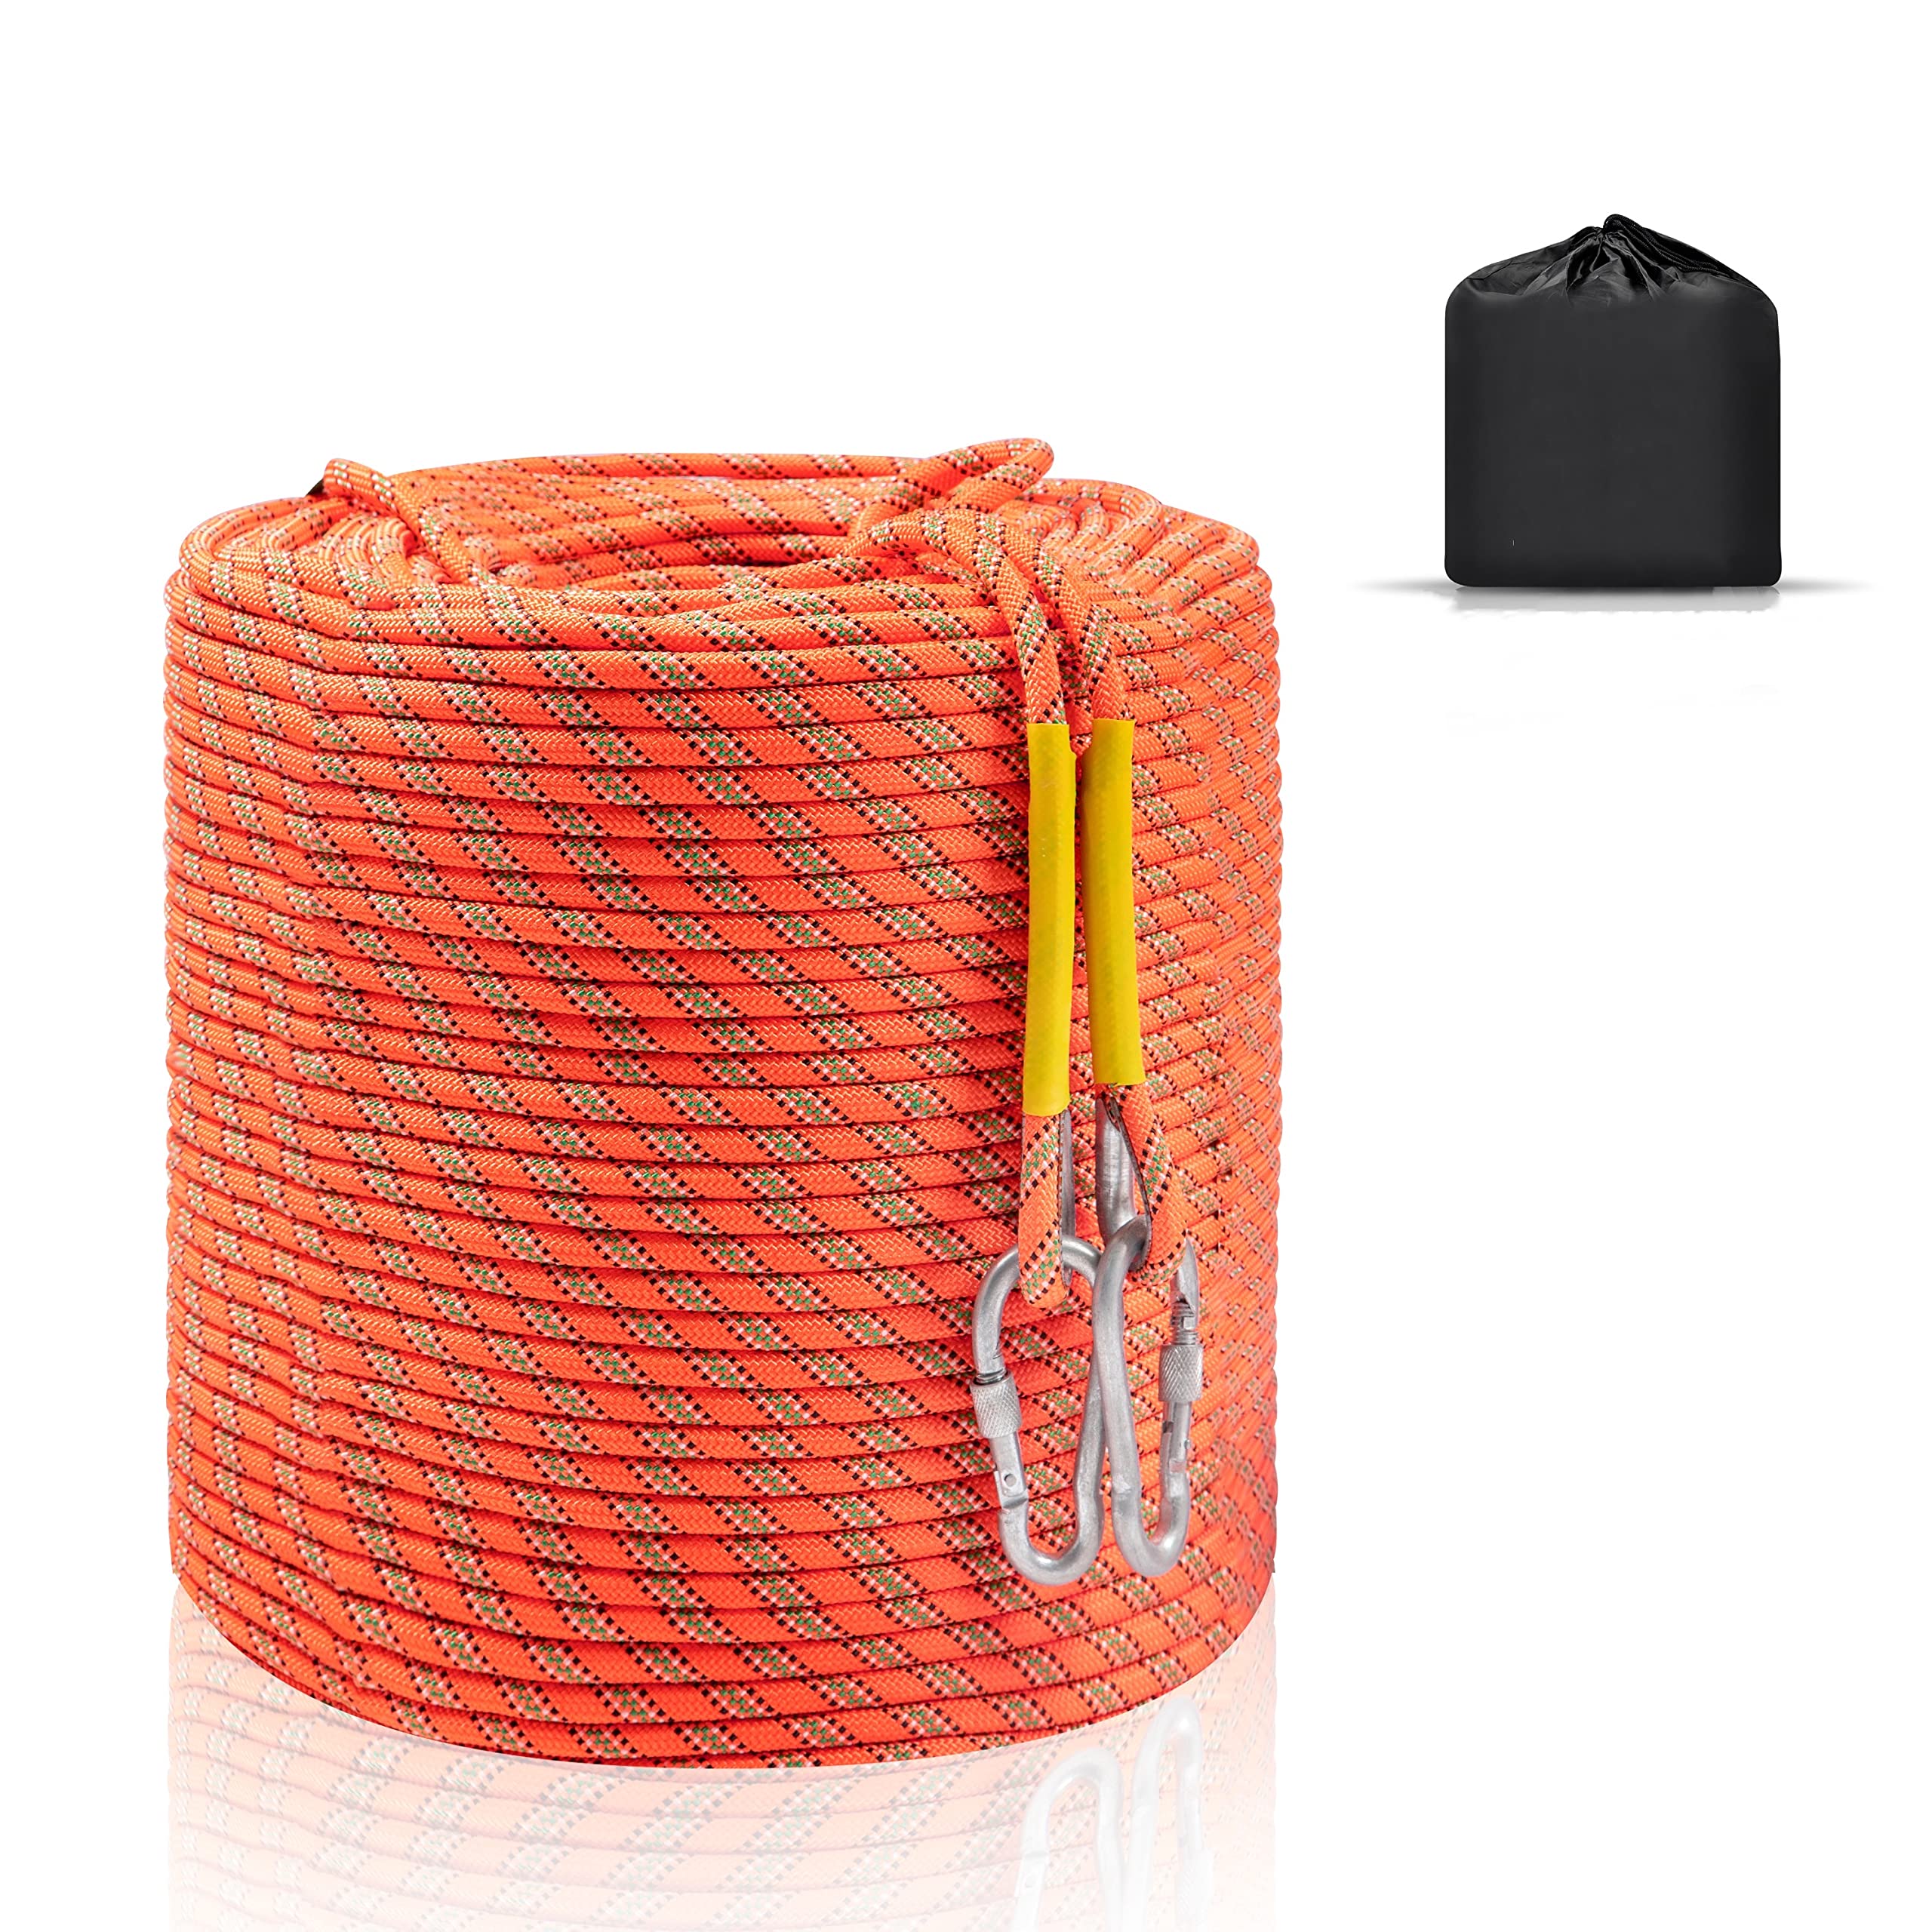 WGOS Climbing Rope, Dynamic Rock Climbing Rope, Braided Polyester Arborist Rigging  Rope, Escape Equipment in 32ft/64ft/96ft/160ft/230ft/500ft/985ft with Carry  Bag Orange 10m/32ft